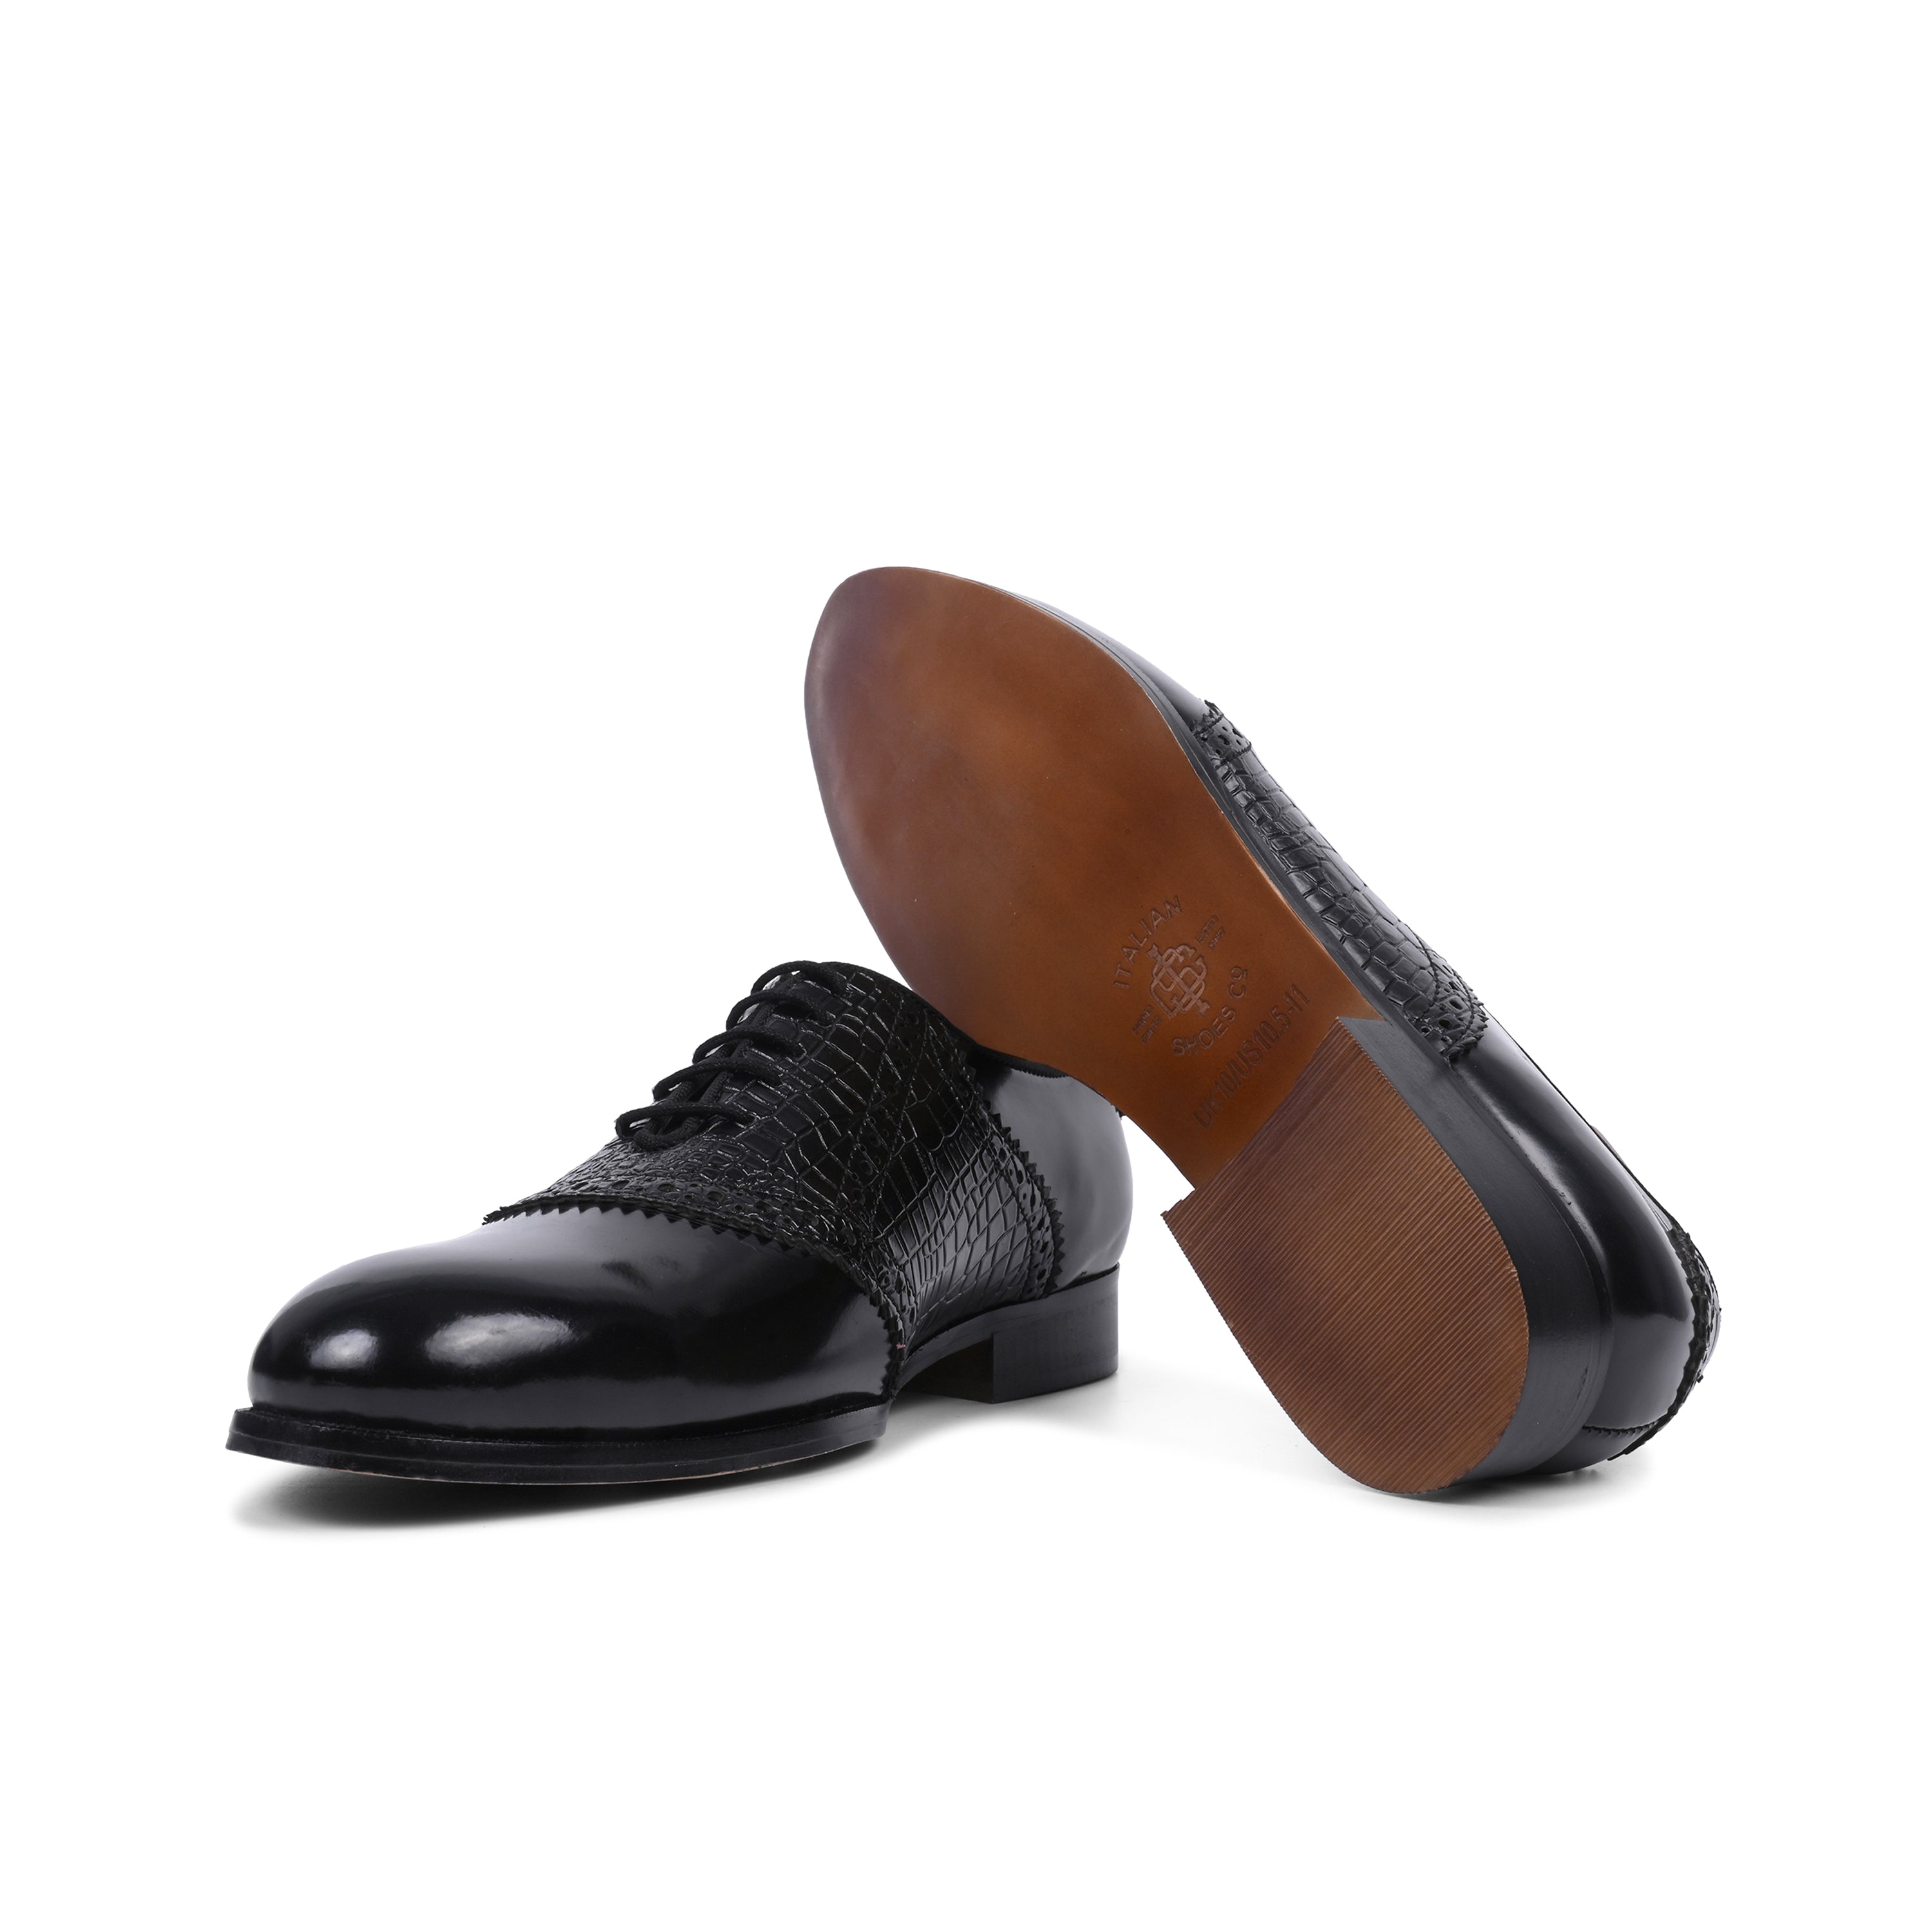 Nell Hines Oxford Shoes